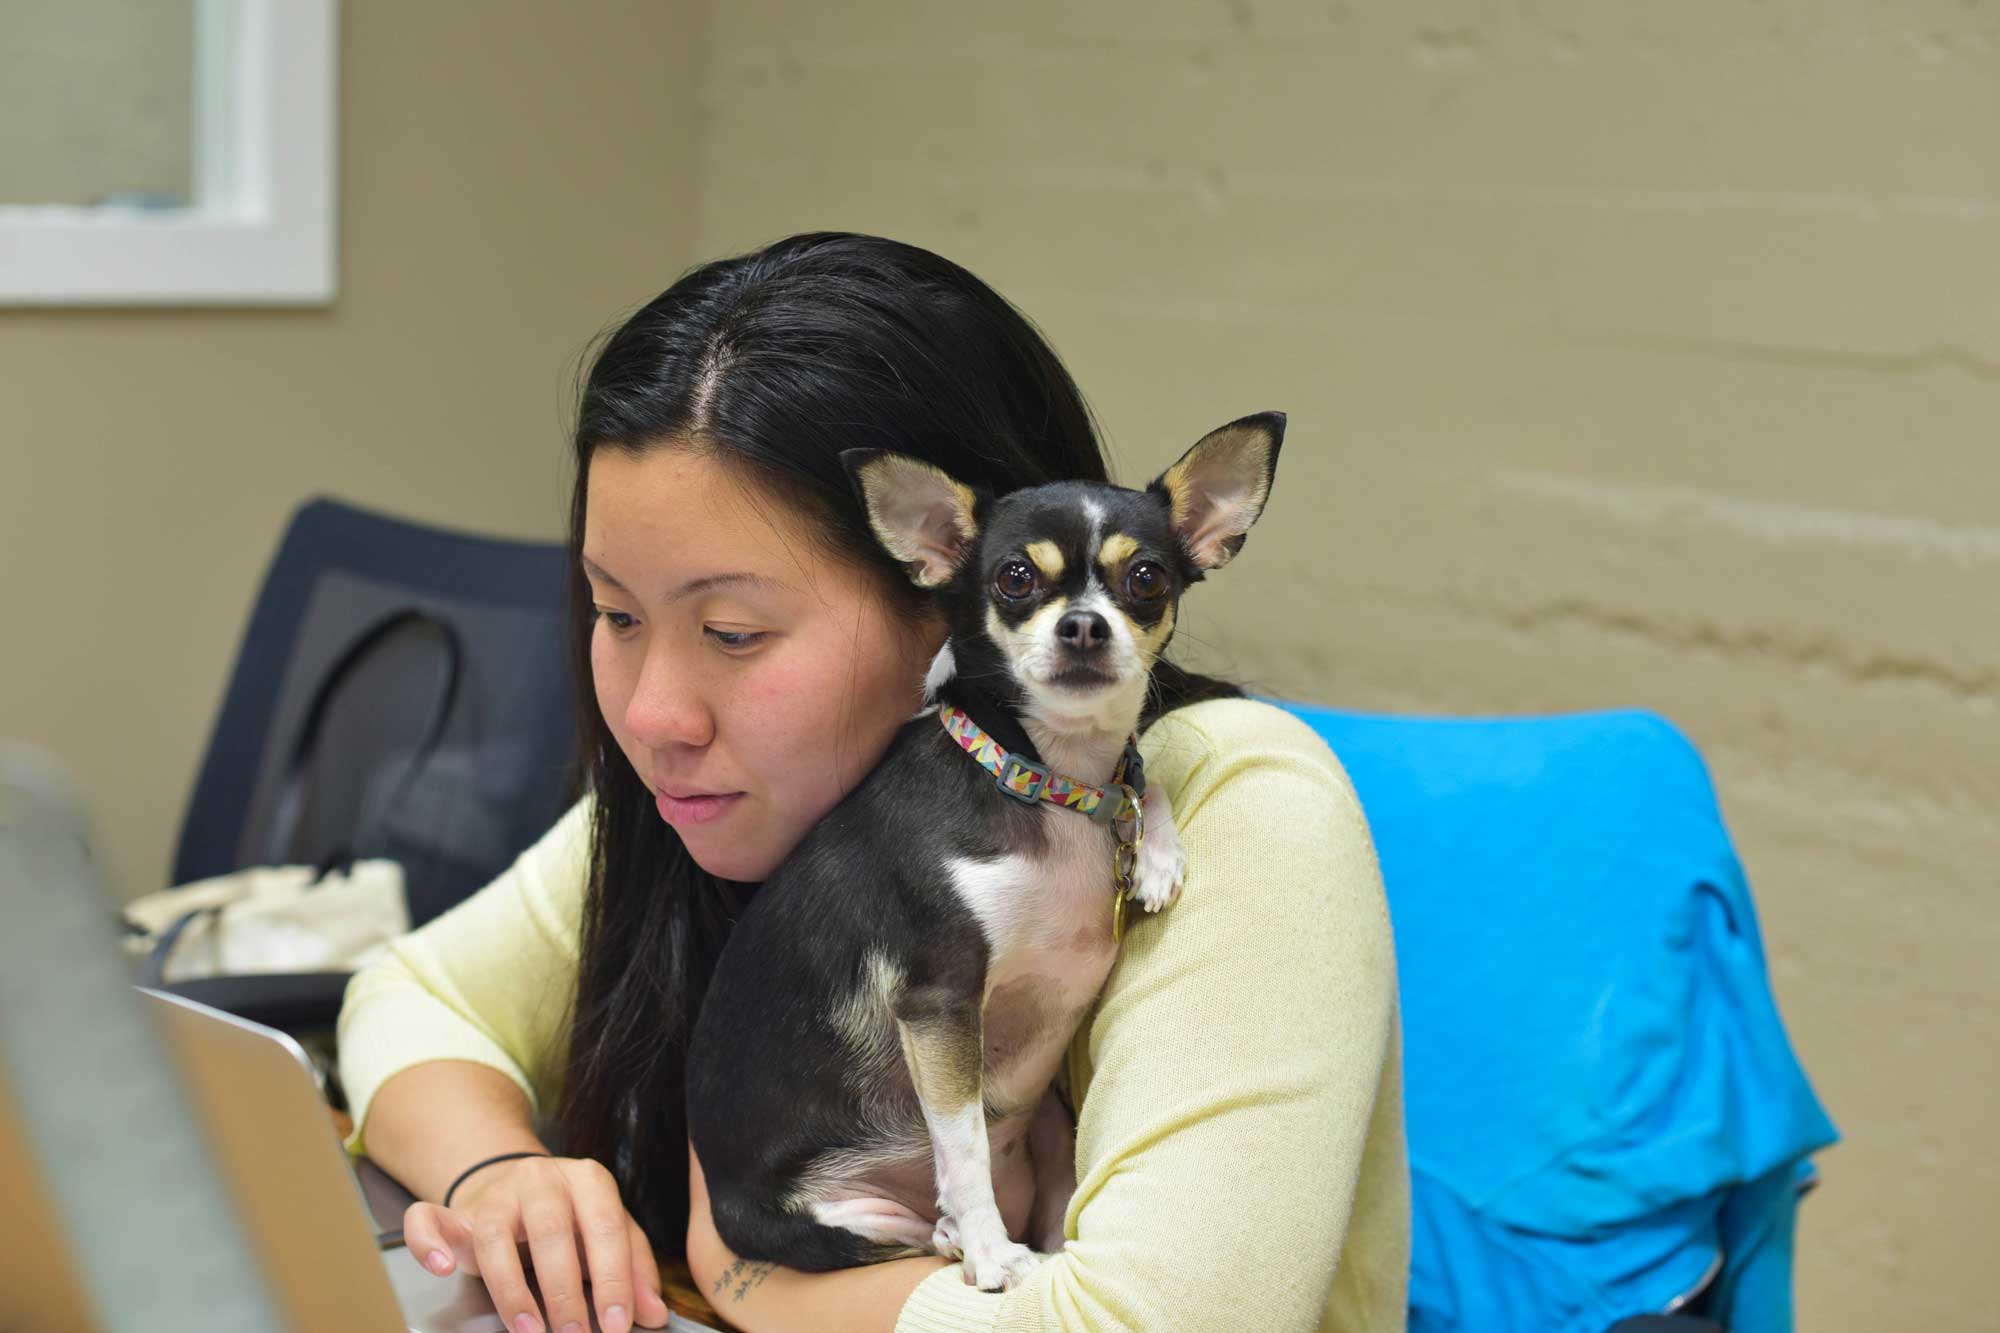 The canine assistant to Monica Lo, Nomiku's Creative Director